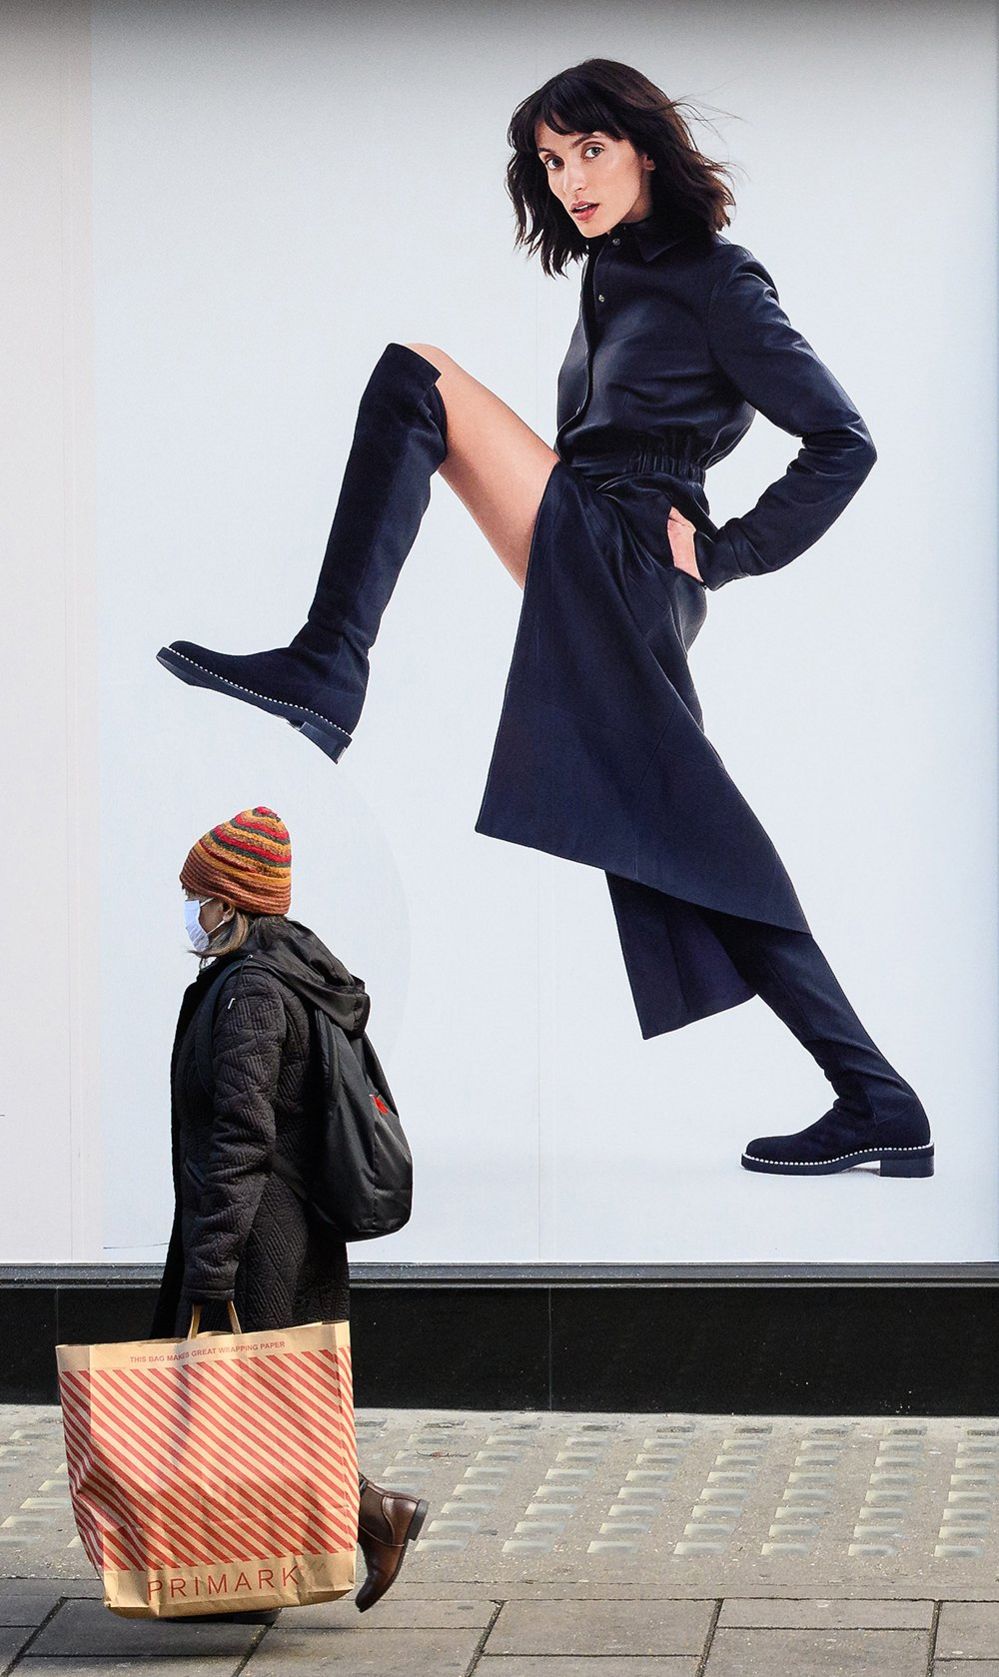 A model in an advertisement appears to step on shopper